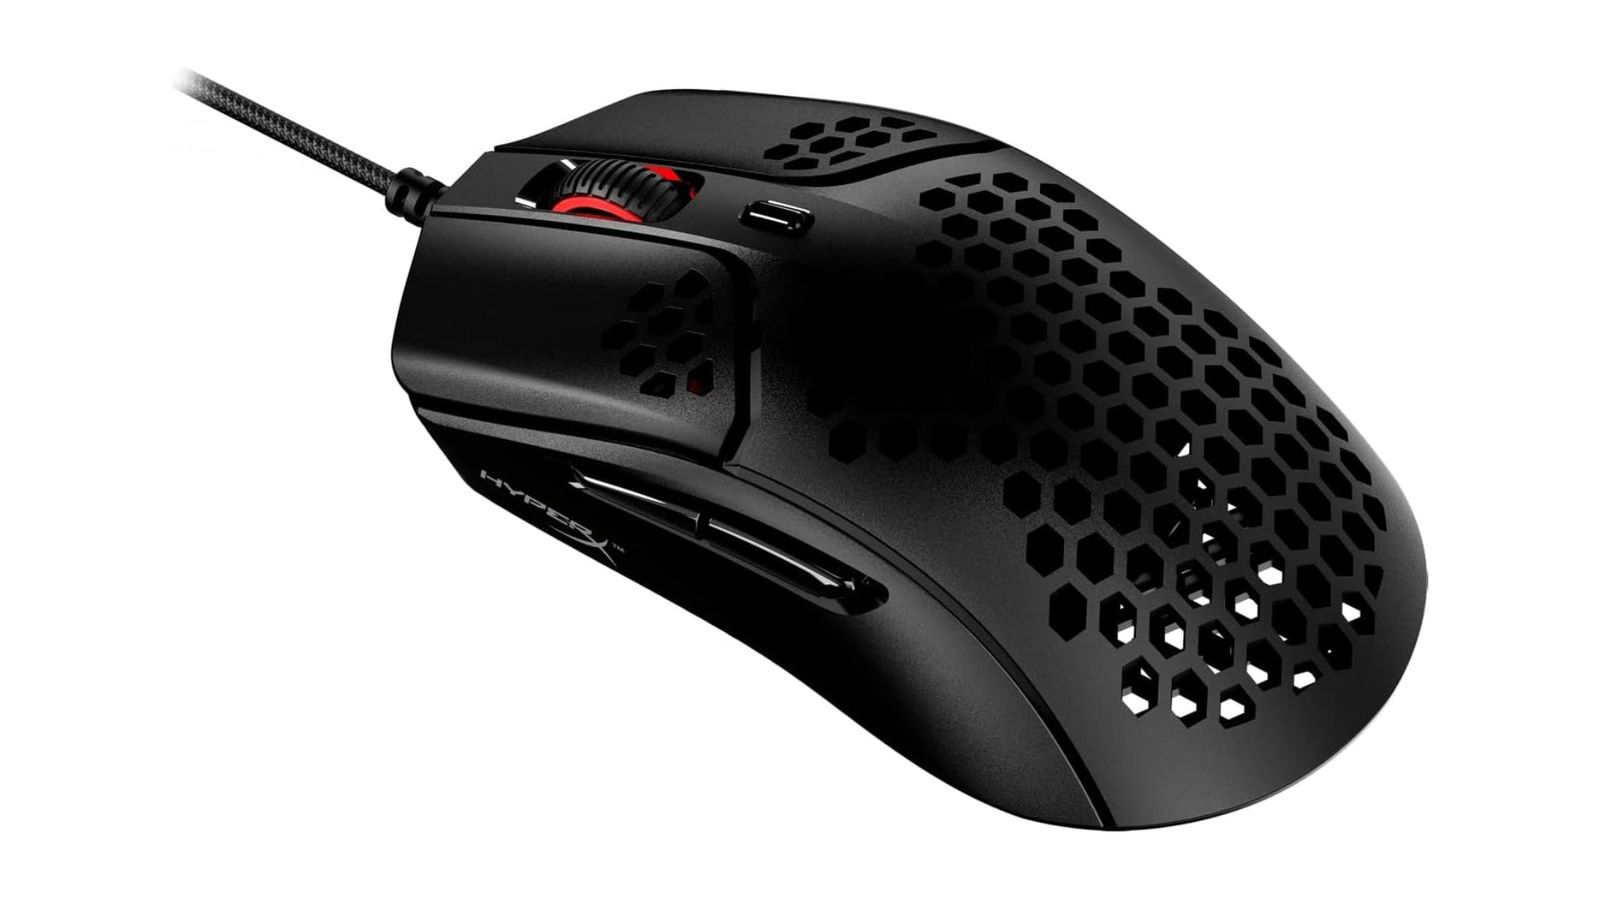 HyperX Pulsefire Haste product image of a black wired mouse featuring a honeycomb structure and a red detail around the scroll wheel.